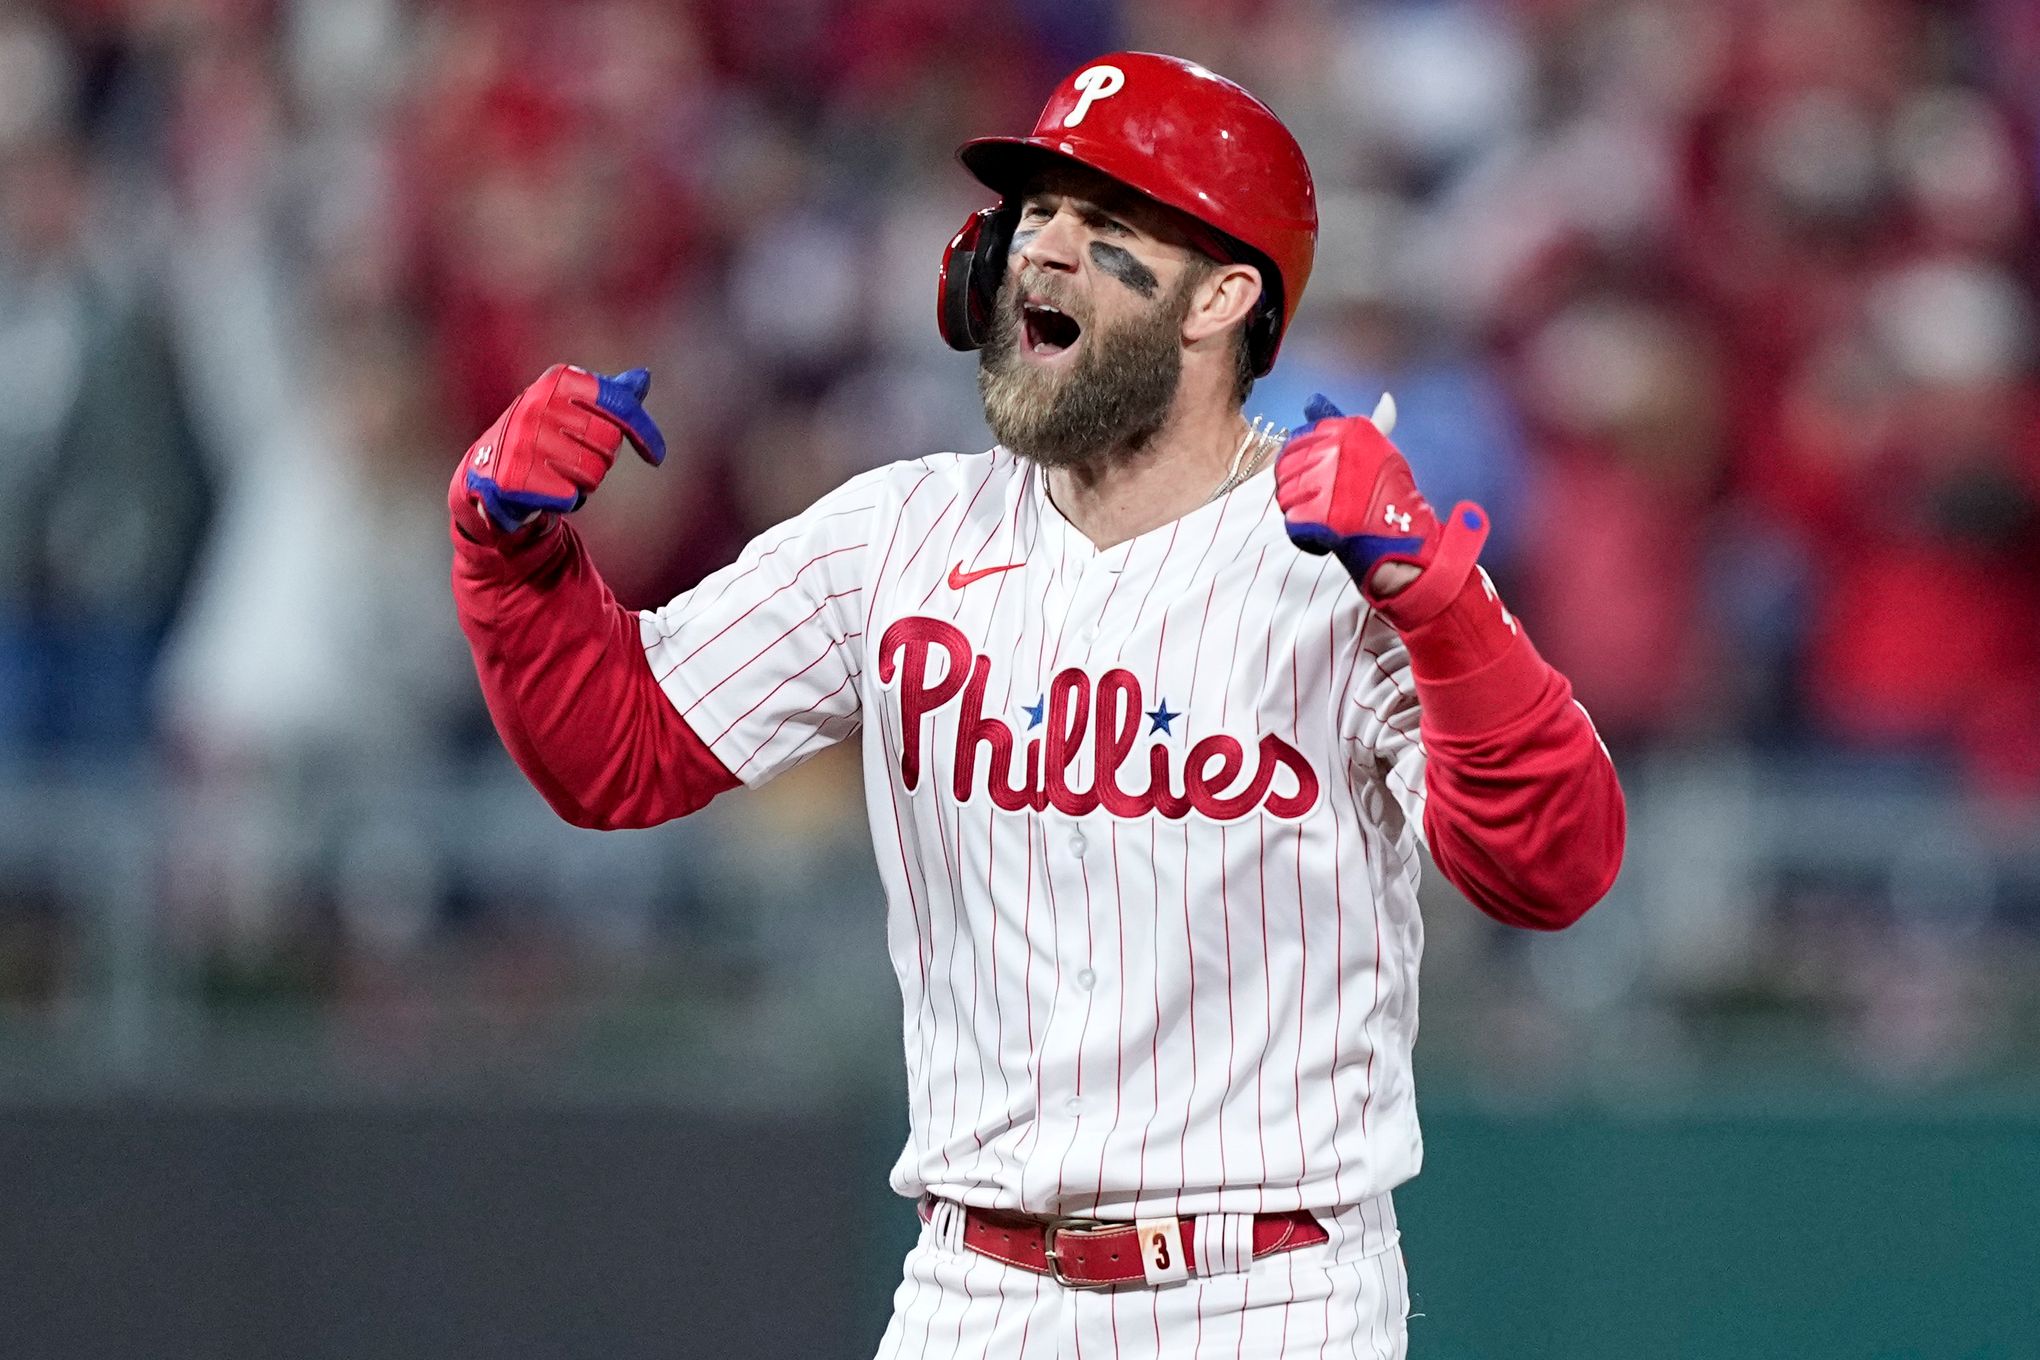 Bryce Harper's HR powers Phillies past Padres, into World Series